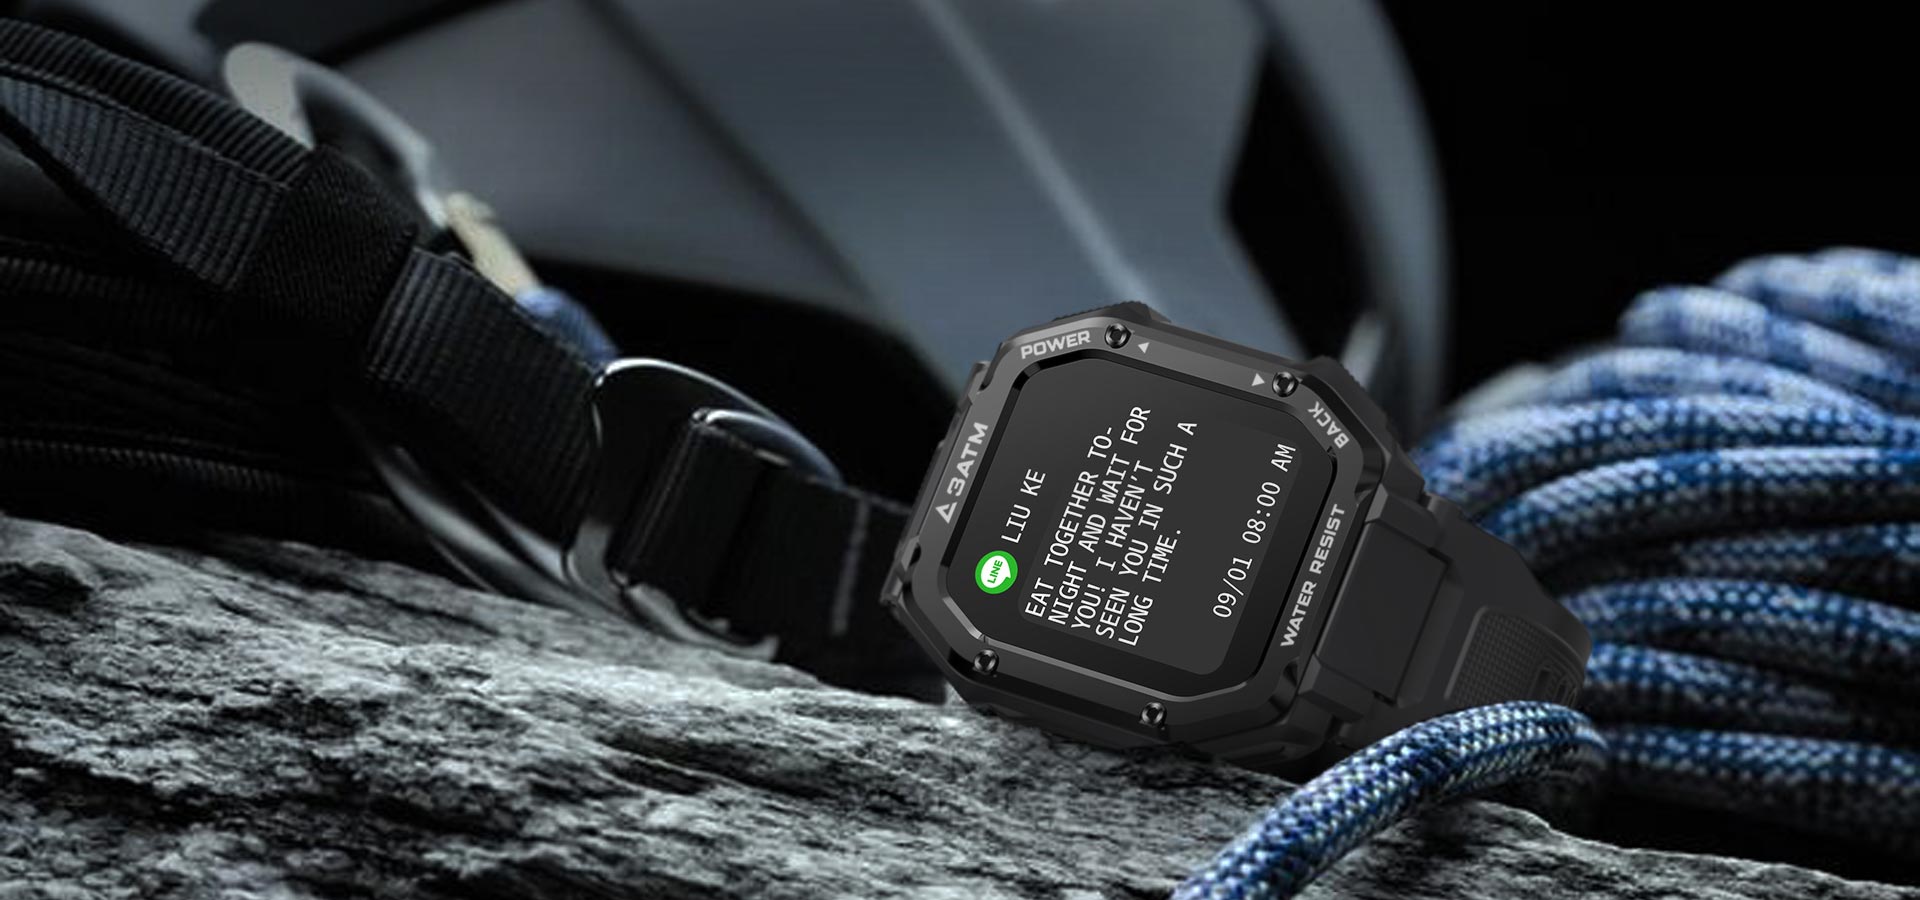 KOSPET ROCK Rugged Smartwatch support Connected to Iphone and Andorid Phone